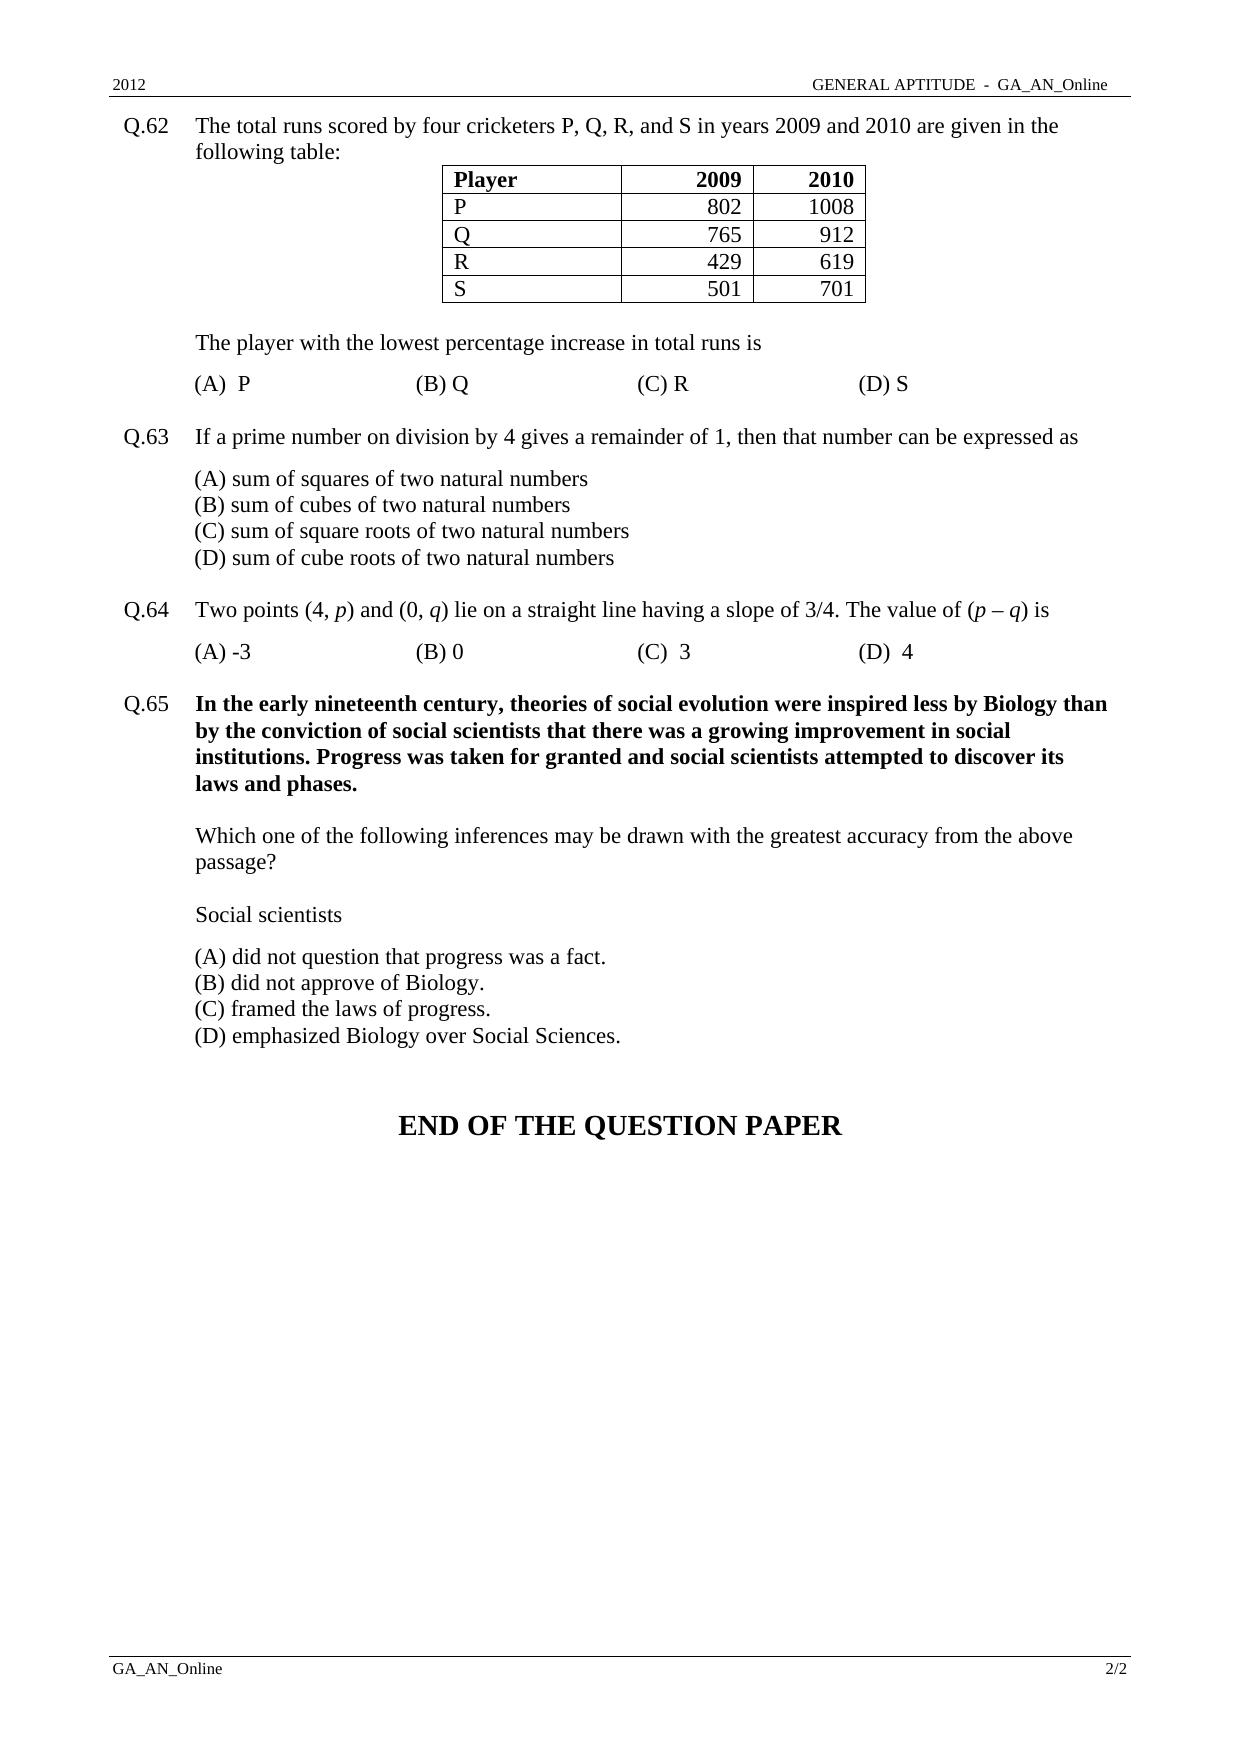 GATE 2012 Mining Engineering (MN) Question Paper with Answer Key - Page 12